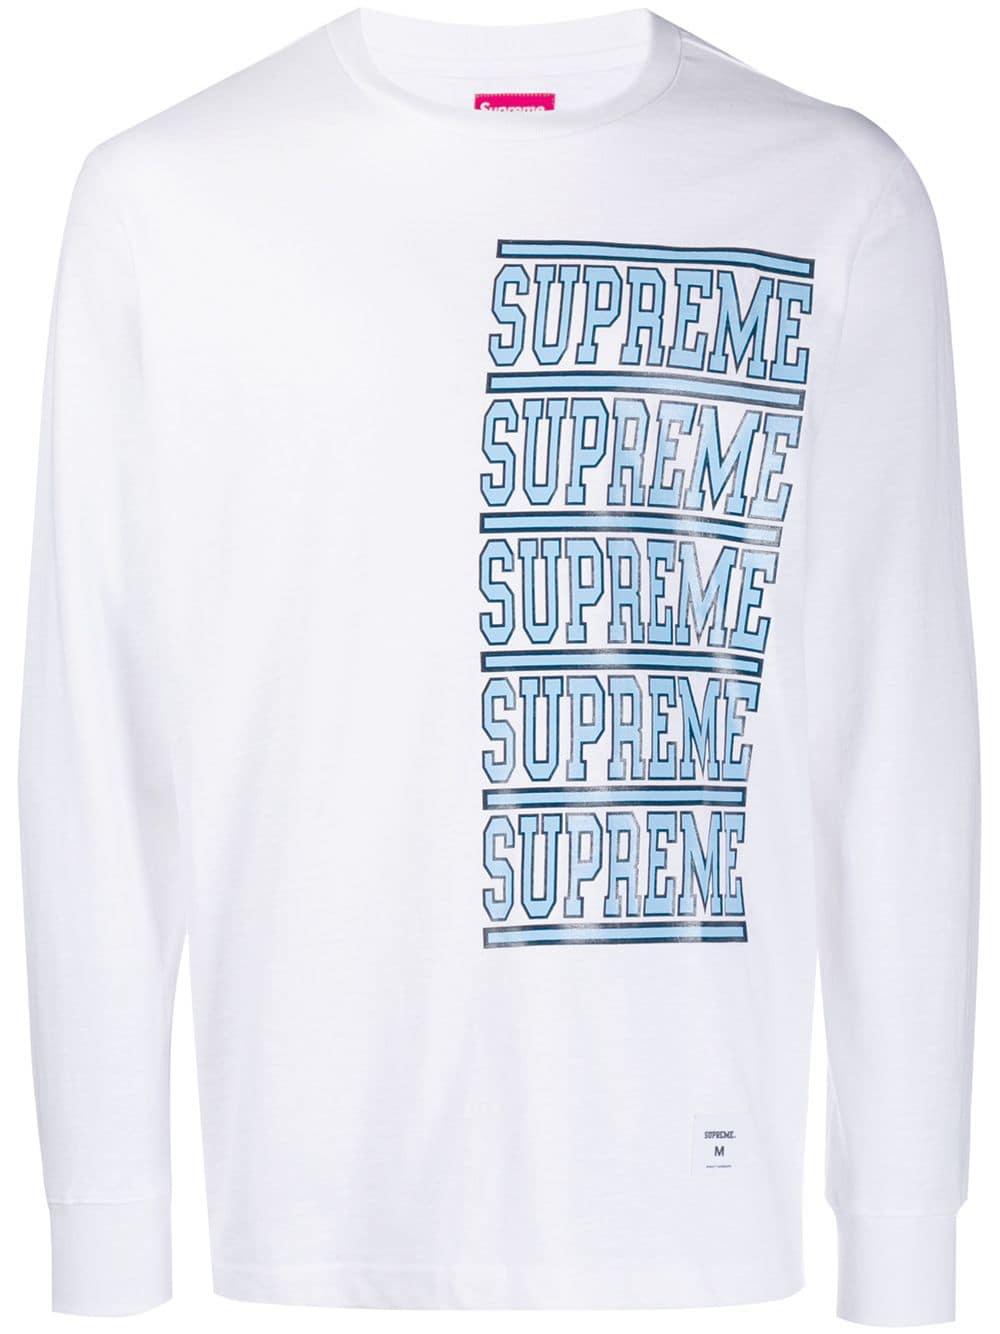 Supreme Cotton Stacked Long Sleeve Top in White for Men - Lyst